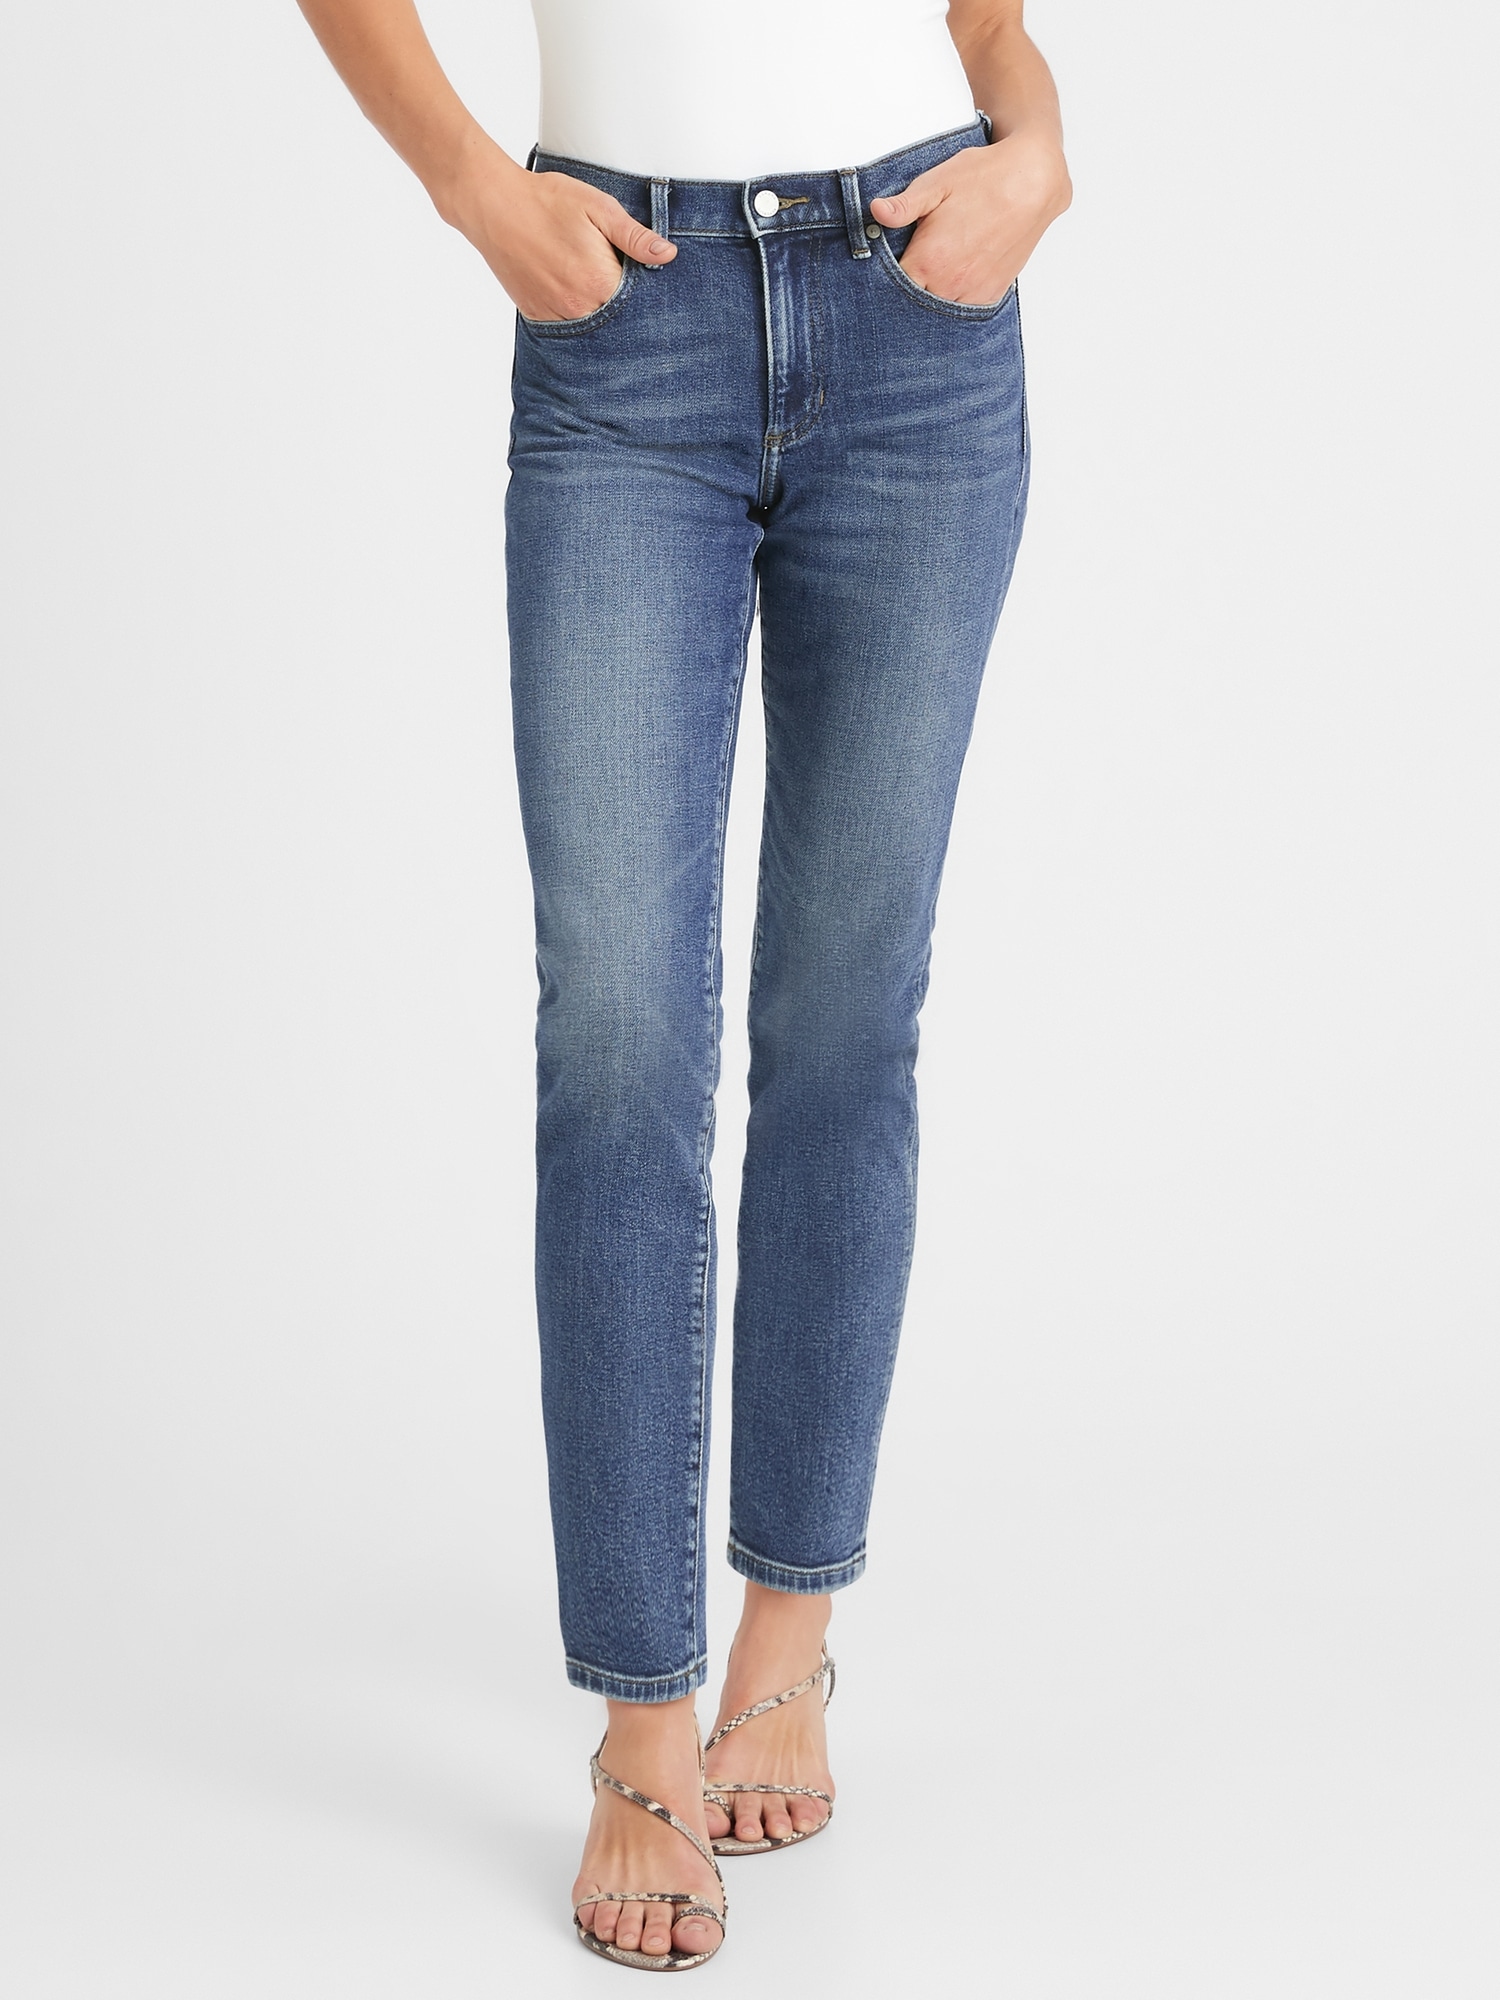 jeans high ankle